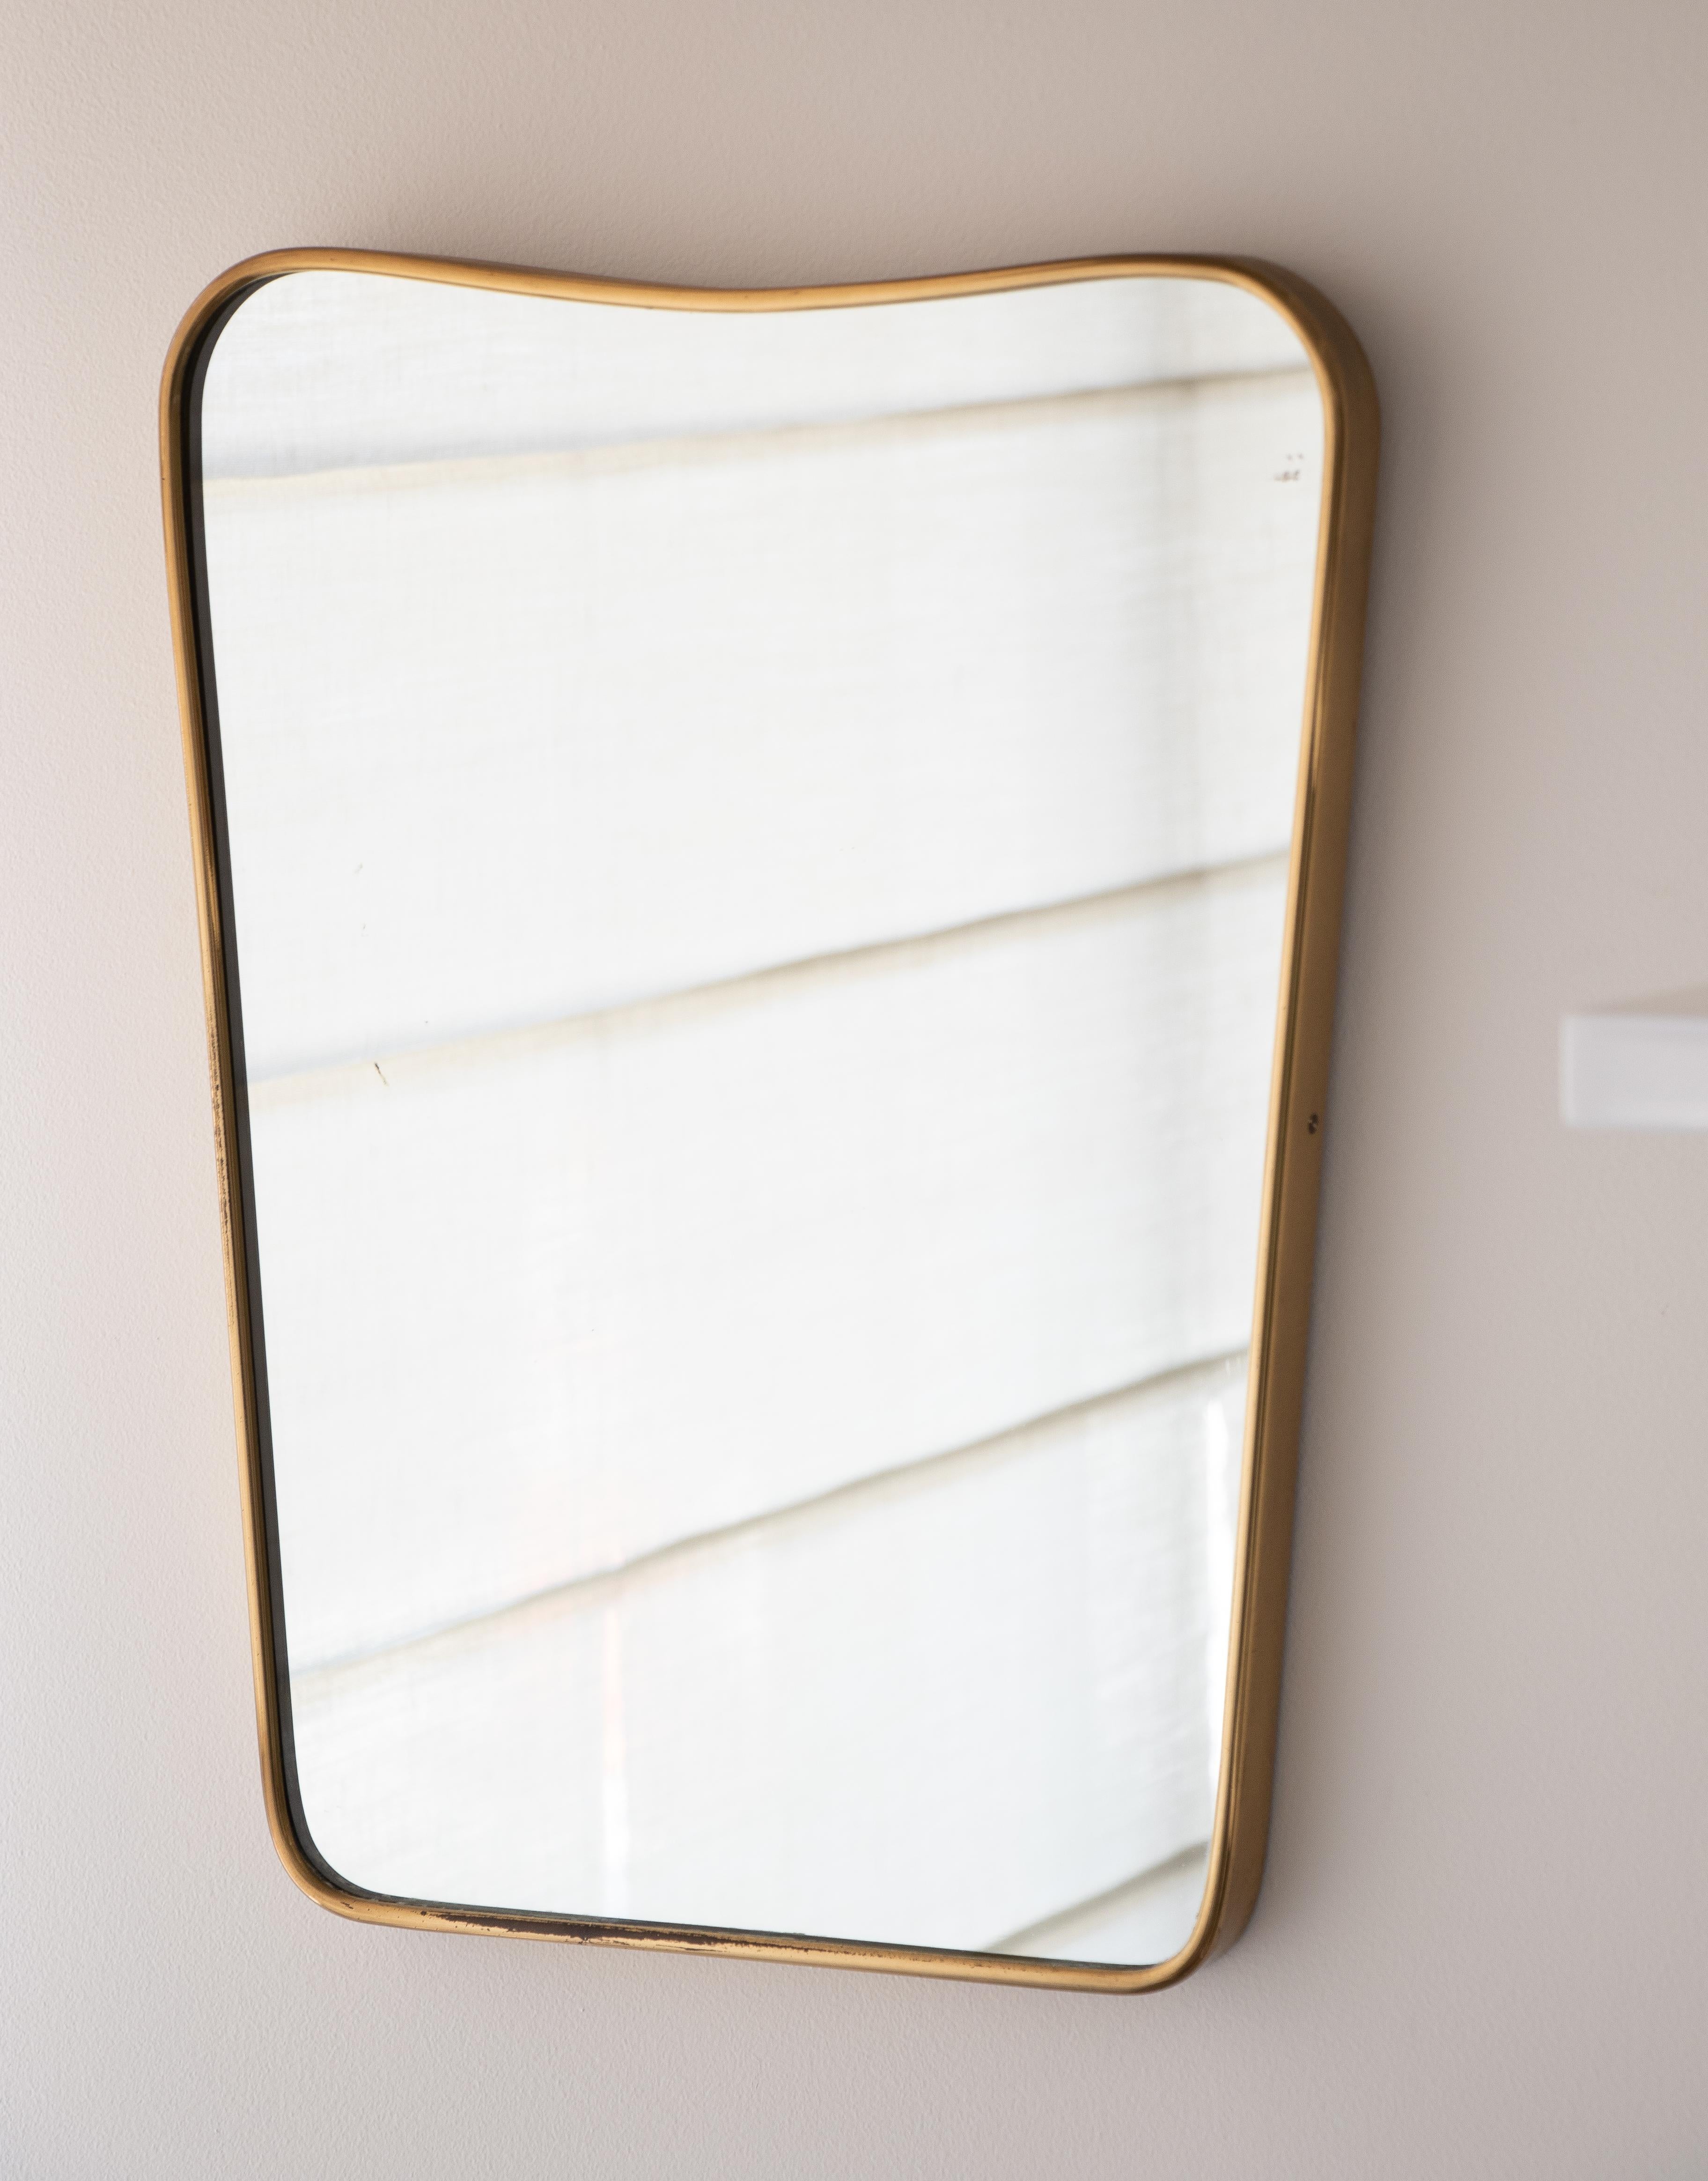 Vintage Italian brass mirror from the 1950s. Wood backing with brass frame around mirror. Wavy top detail in the style of Gio Ponti. Nice age and patina to brass. Measures: Top width 13.5